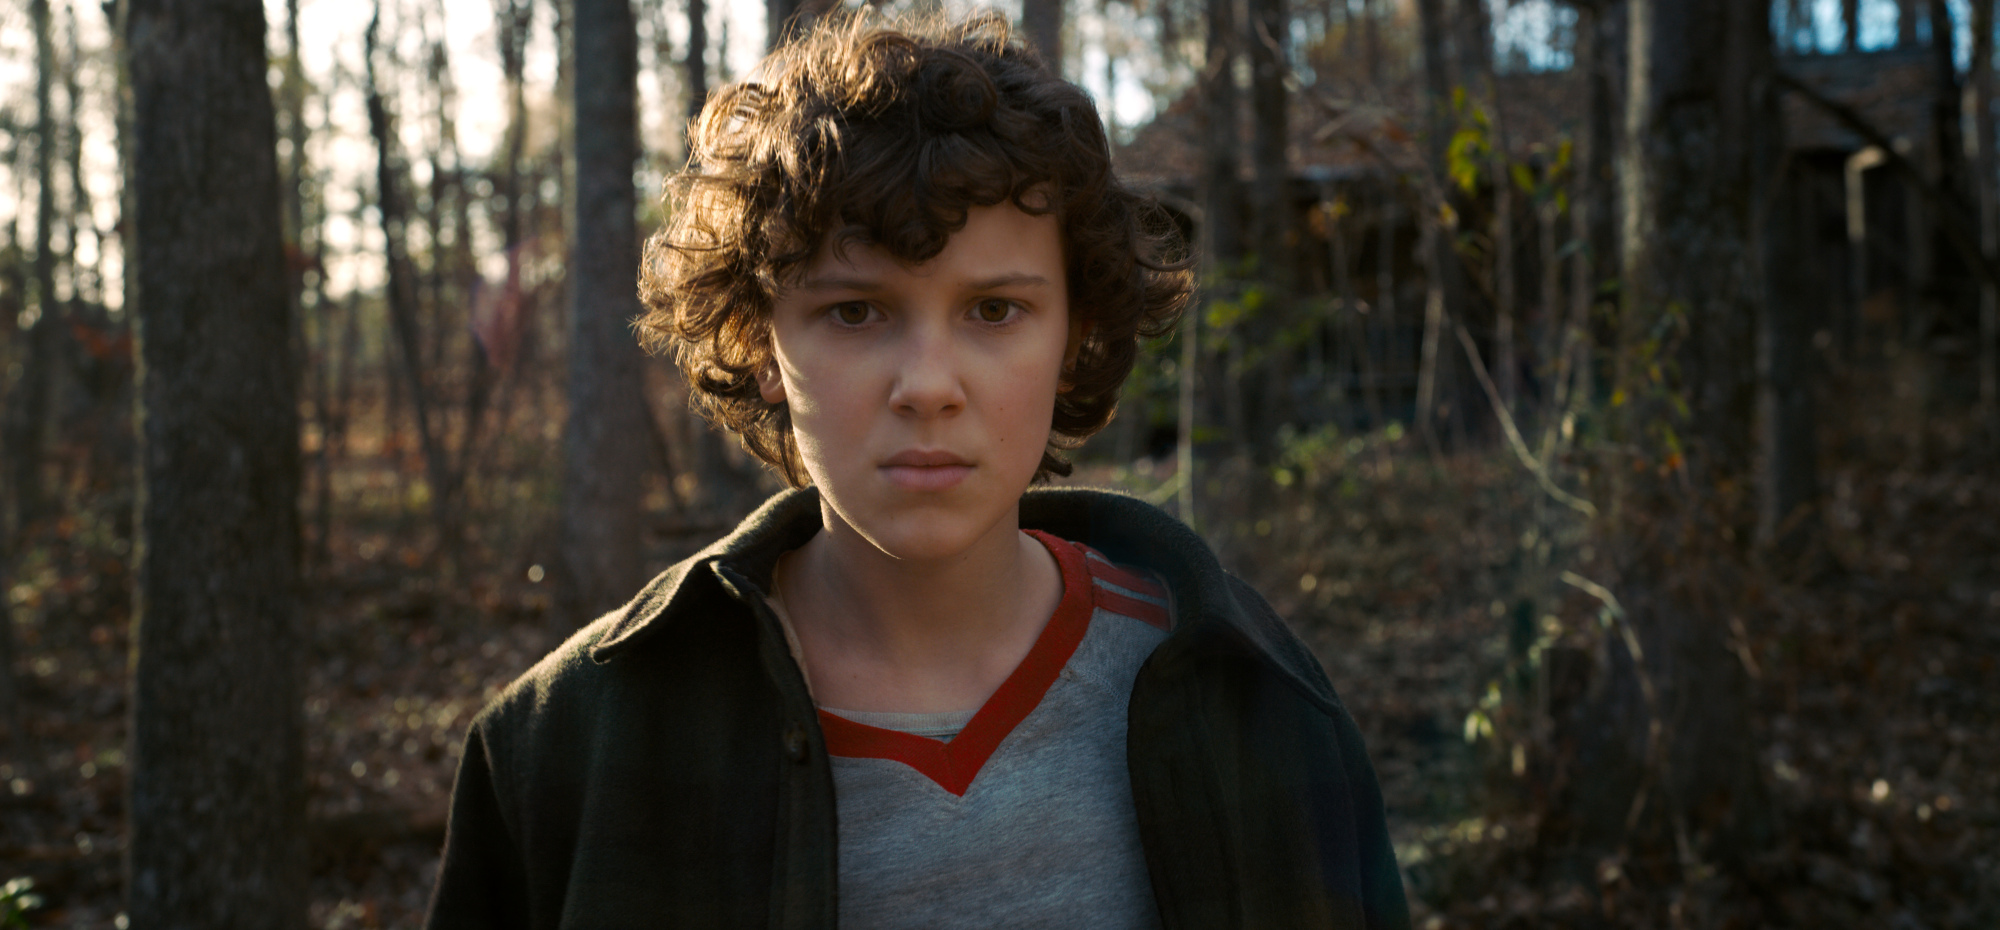 Millie Bobby Brown Claims 'Stranger Things' Has Limited Her Creatively